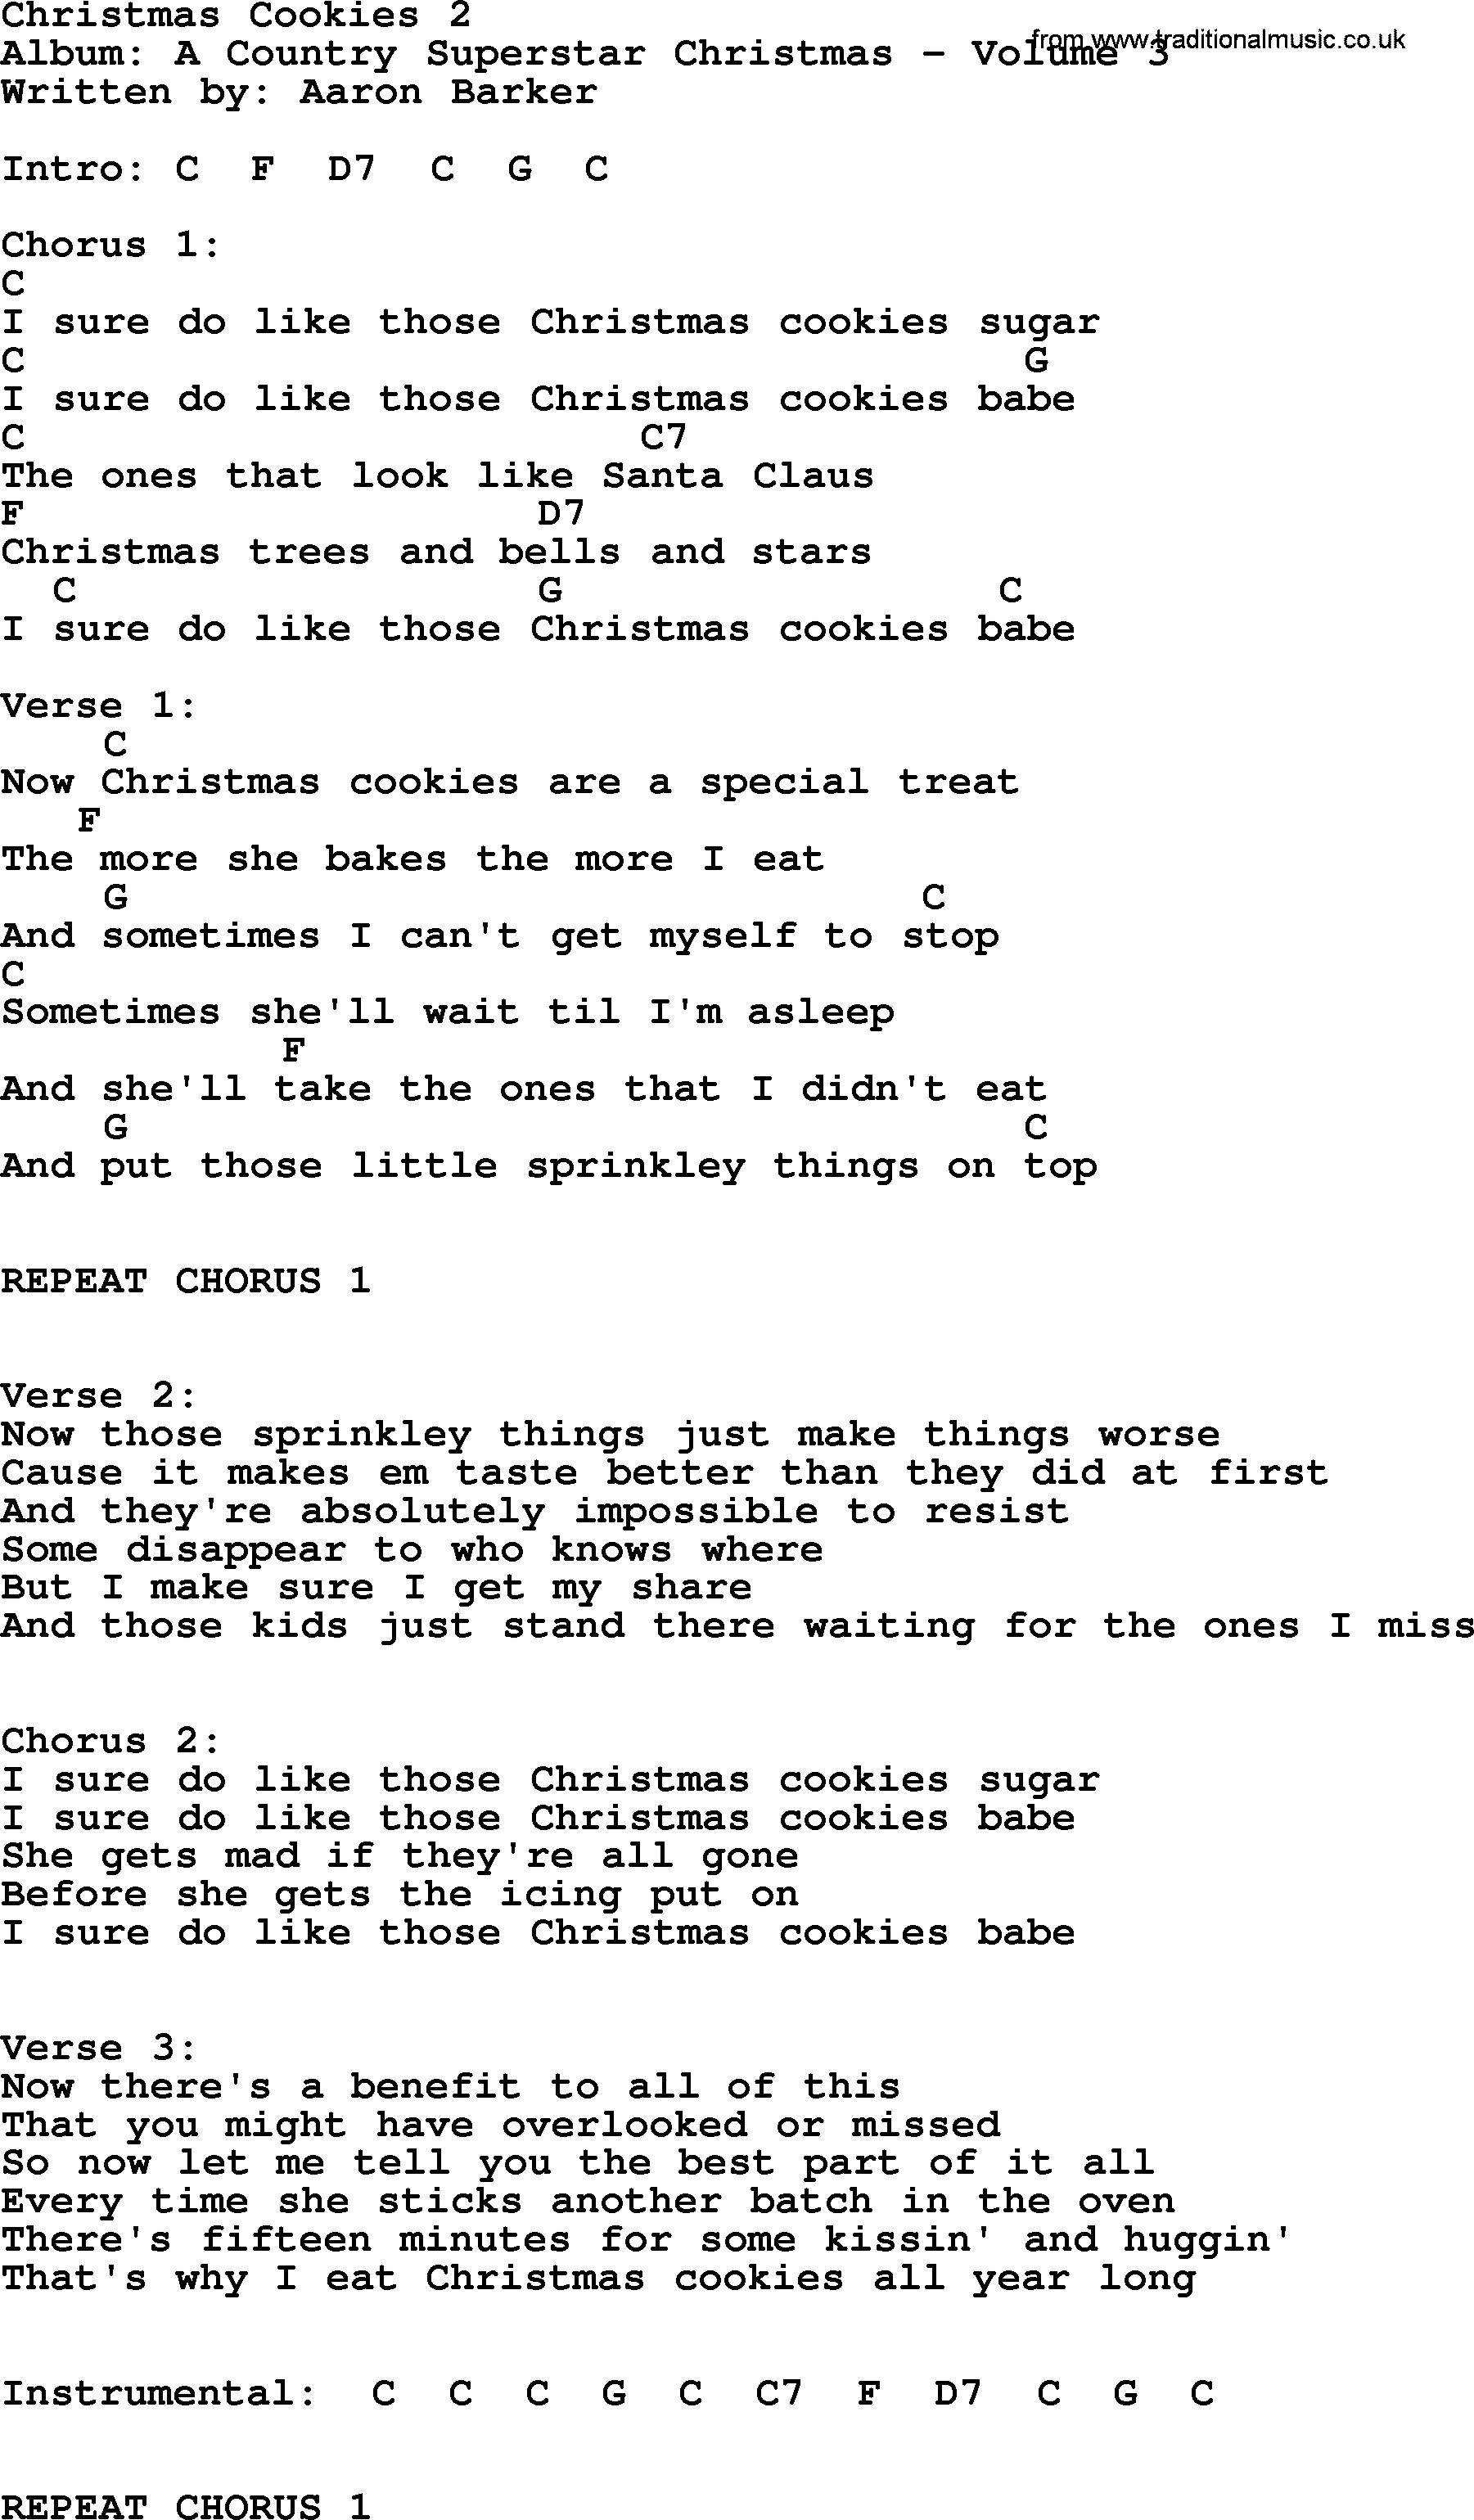 Christmas Cookies Song
 Christmas Cookies 2 by George Strait lyrics and chords